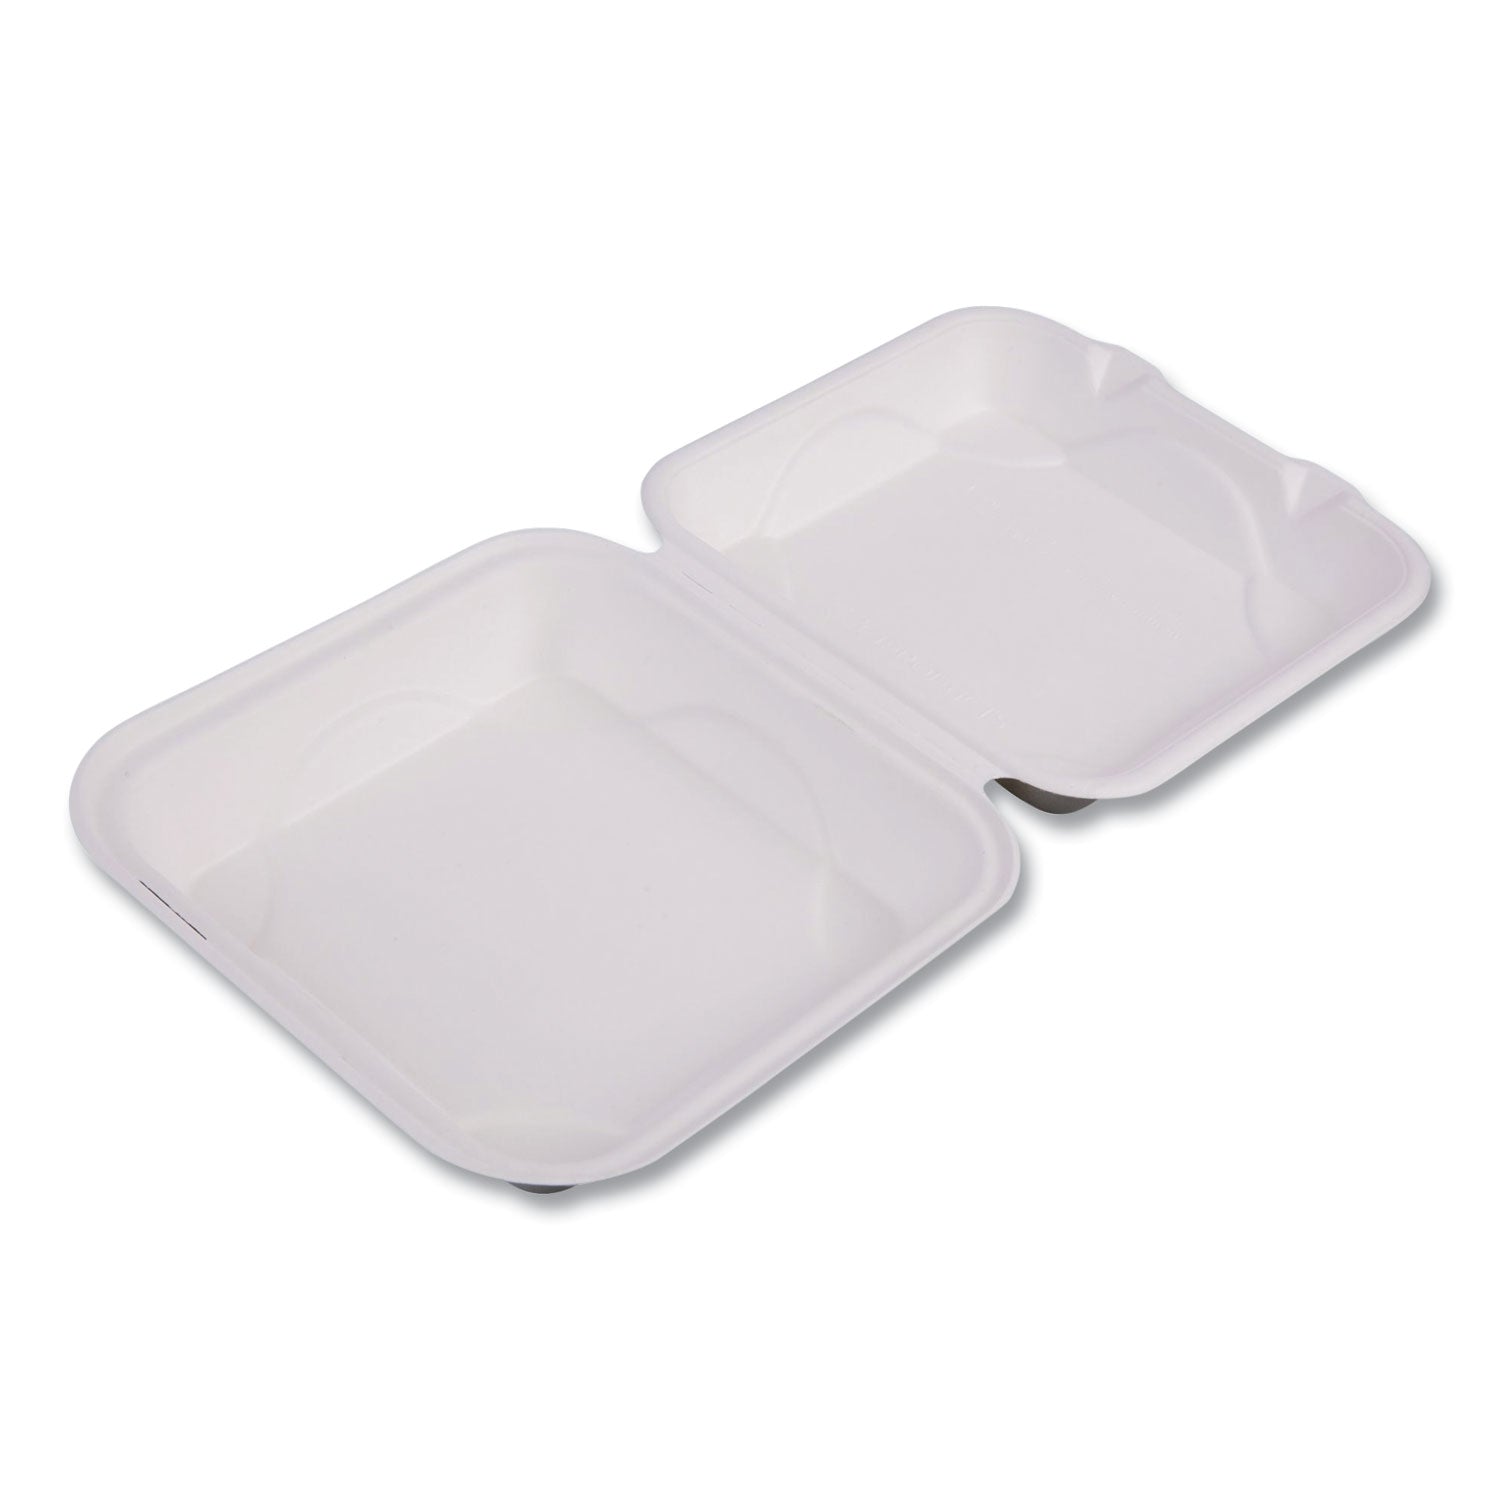 Bagasse Hinged Clamshell Containers, 9 x 9 x 3, White, Sugarcane, 50/Pack, 4 Packs/Carton - 